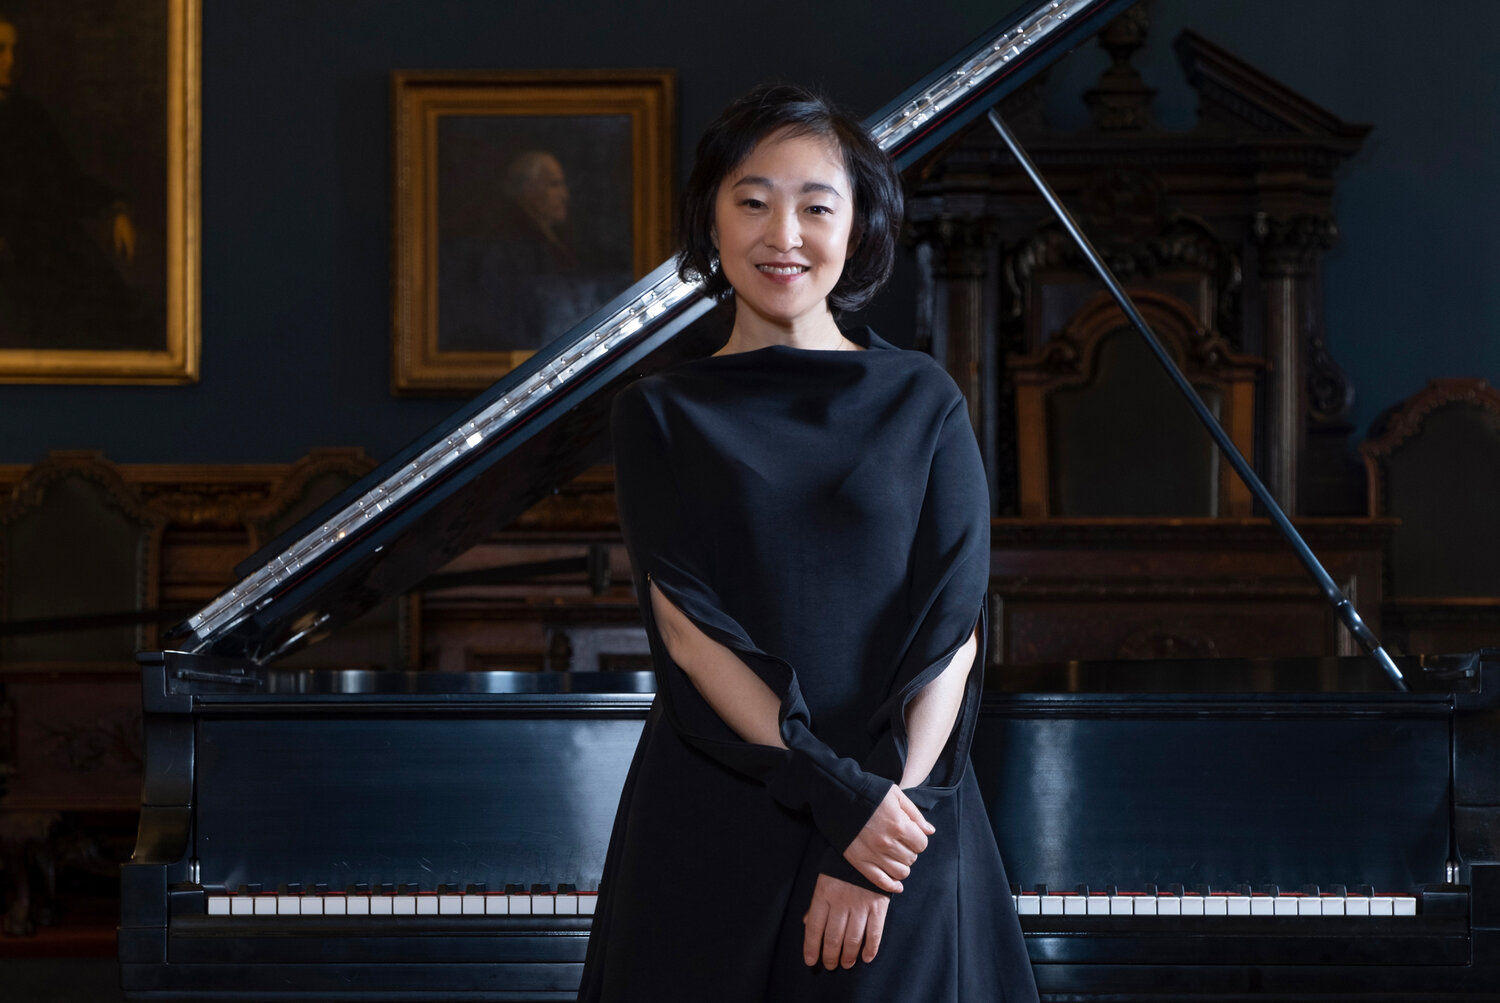 Natalie Zhu, festival artistic director and pianist